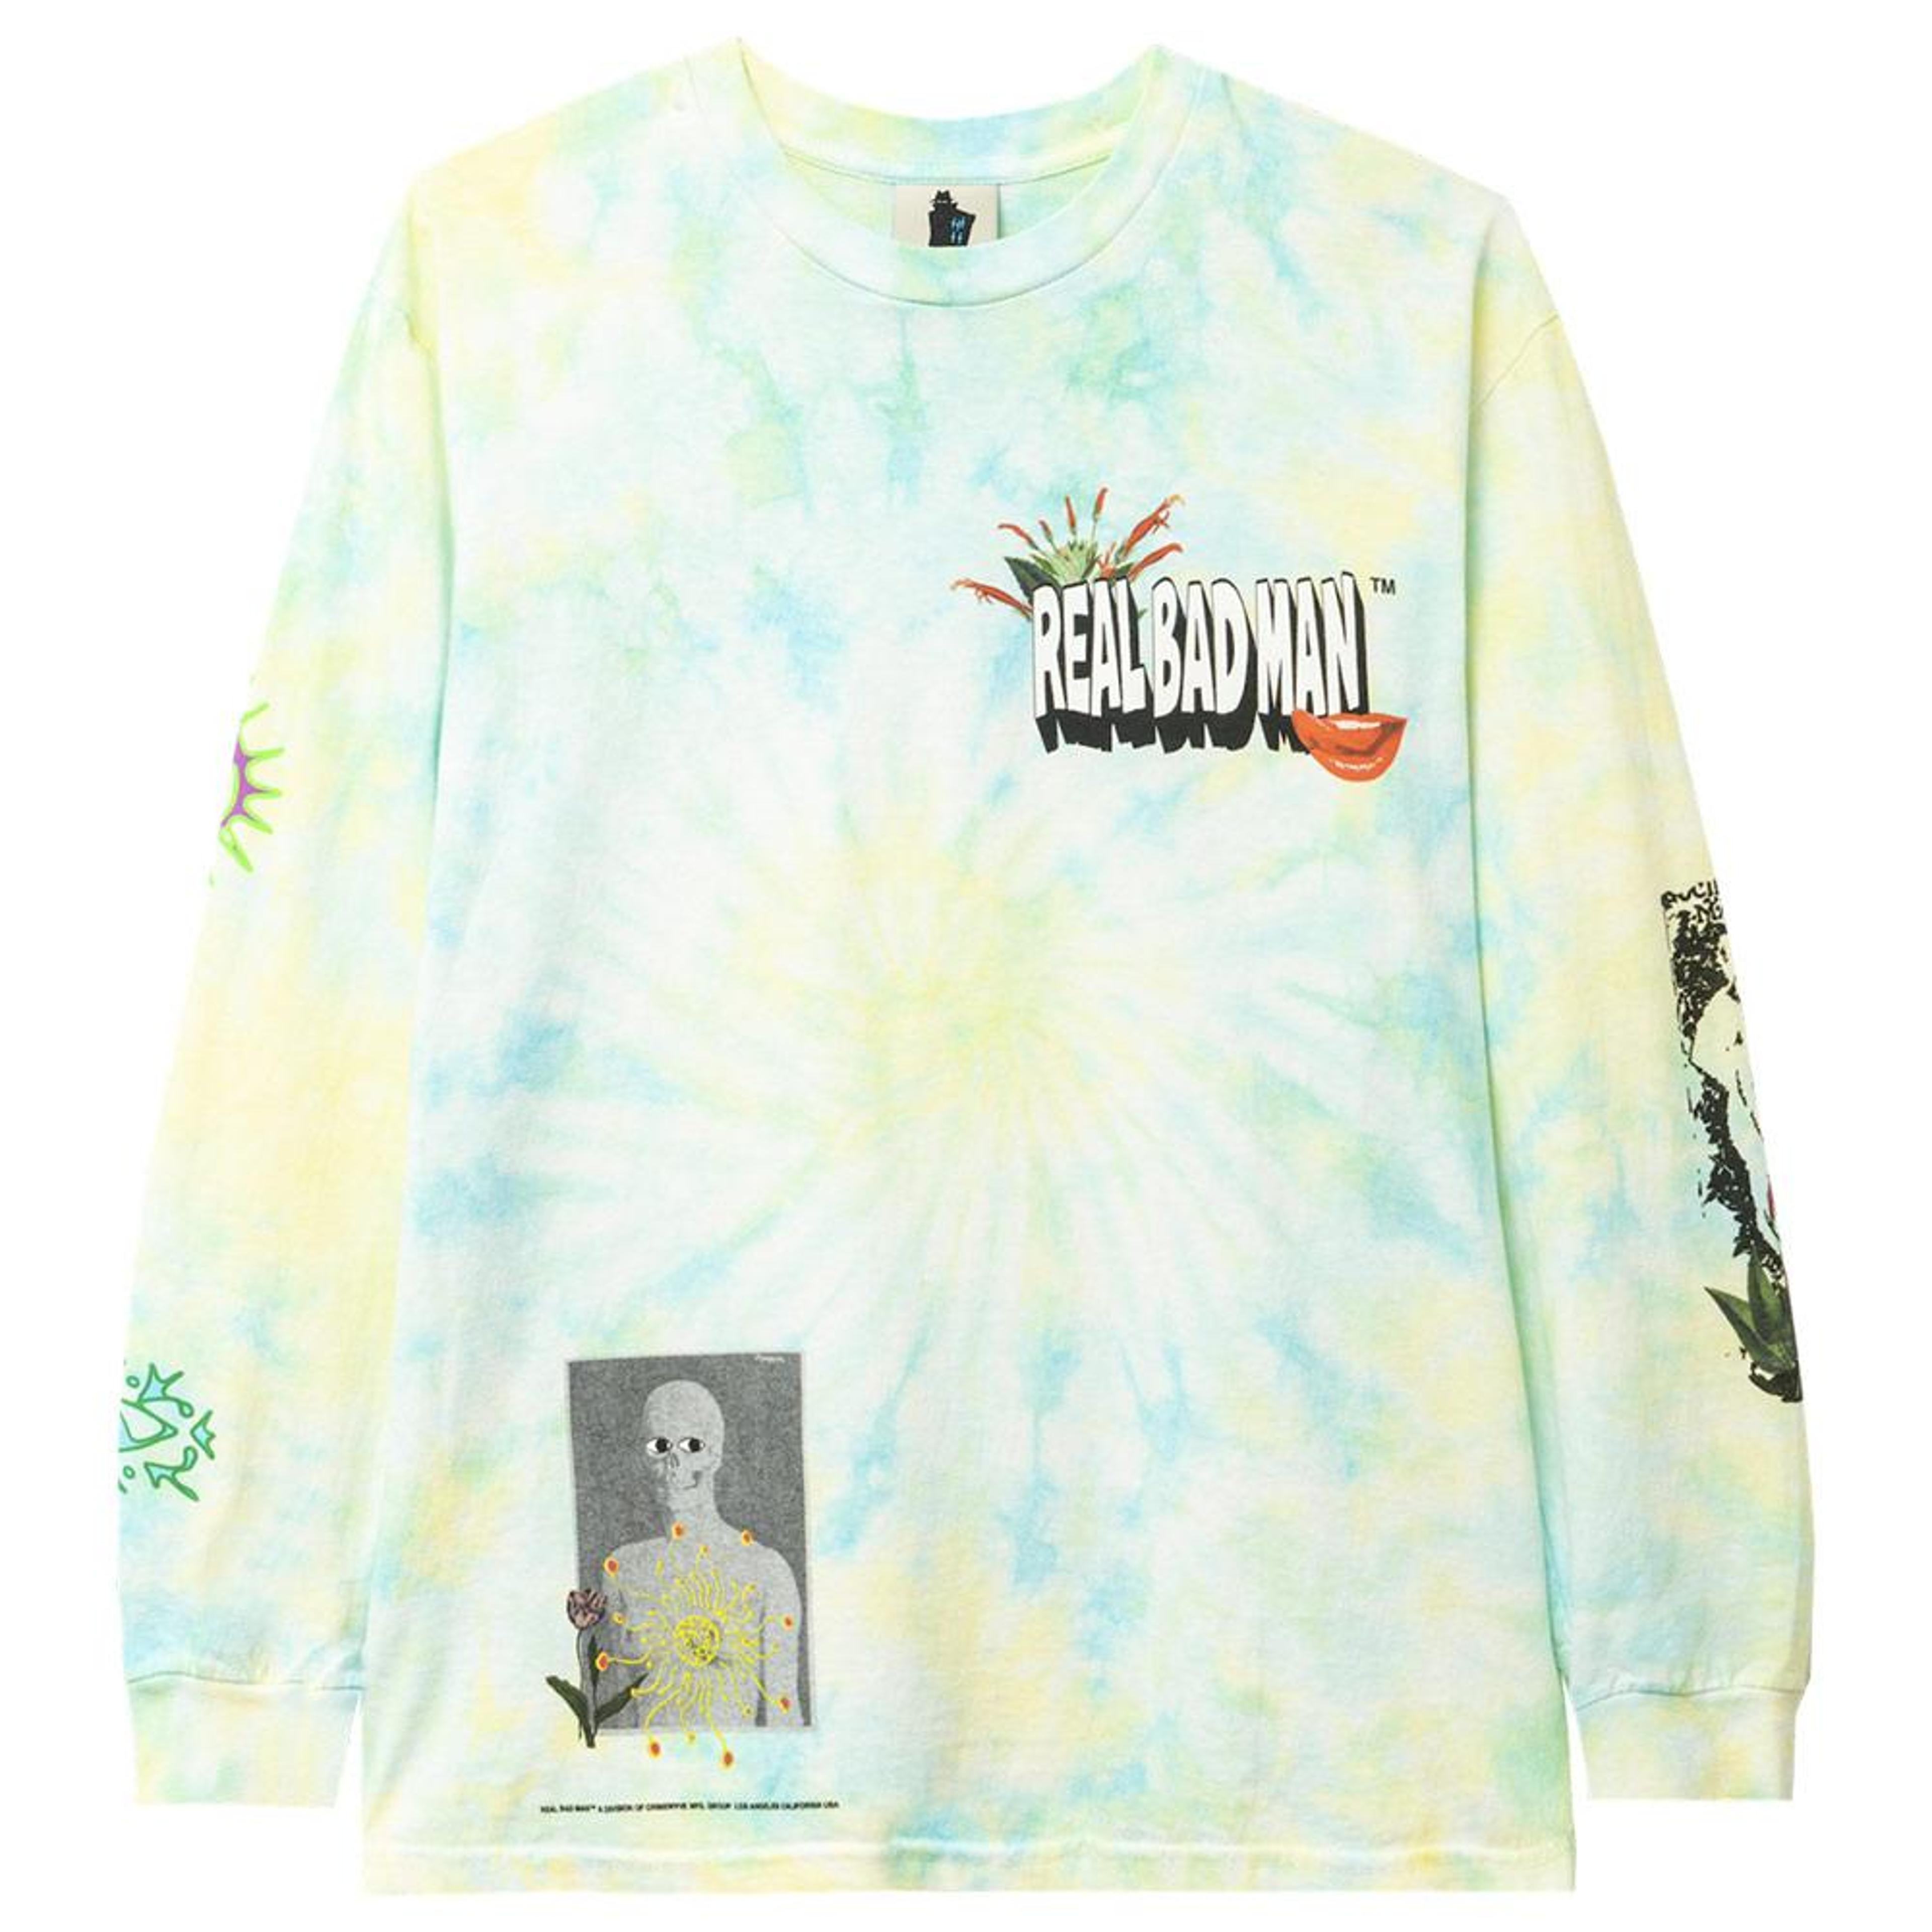 NTWRK - From Outer Space L/S Tee 'Aqua / Yellow TD'